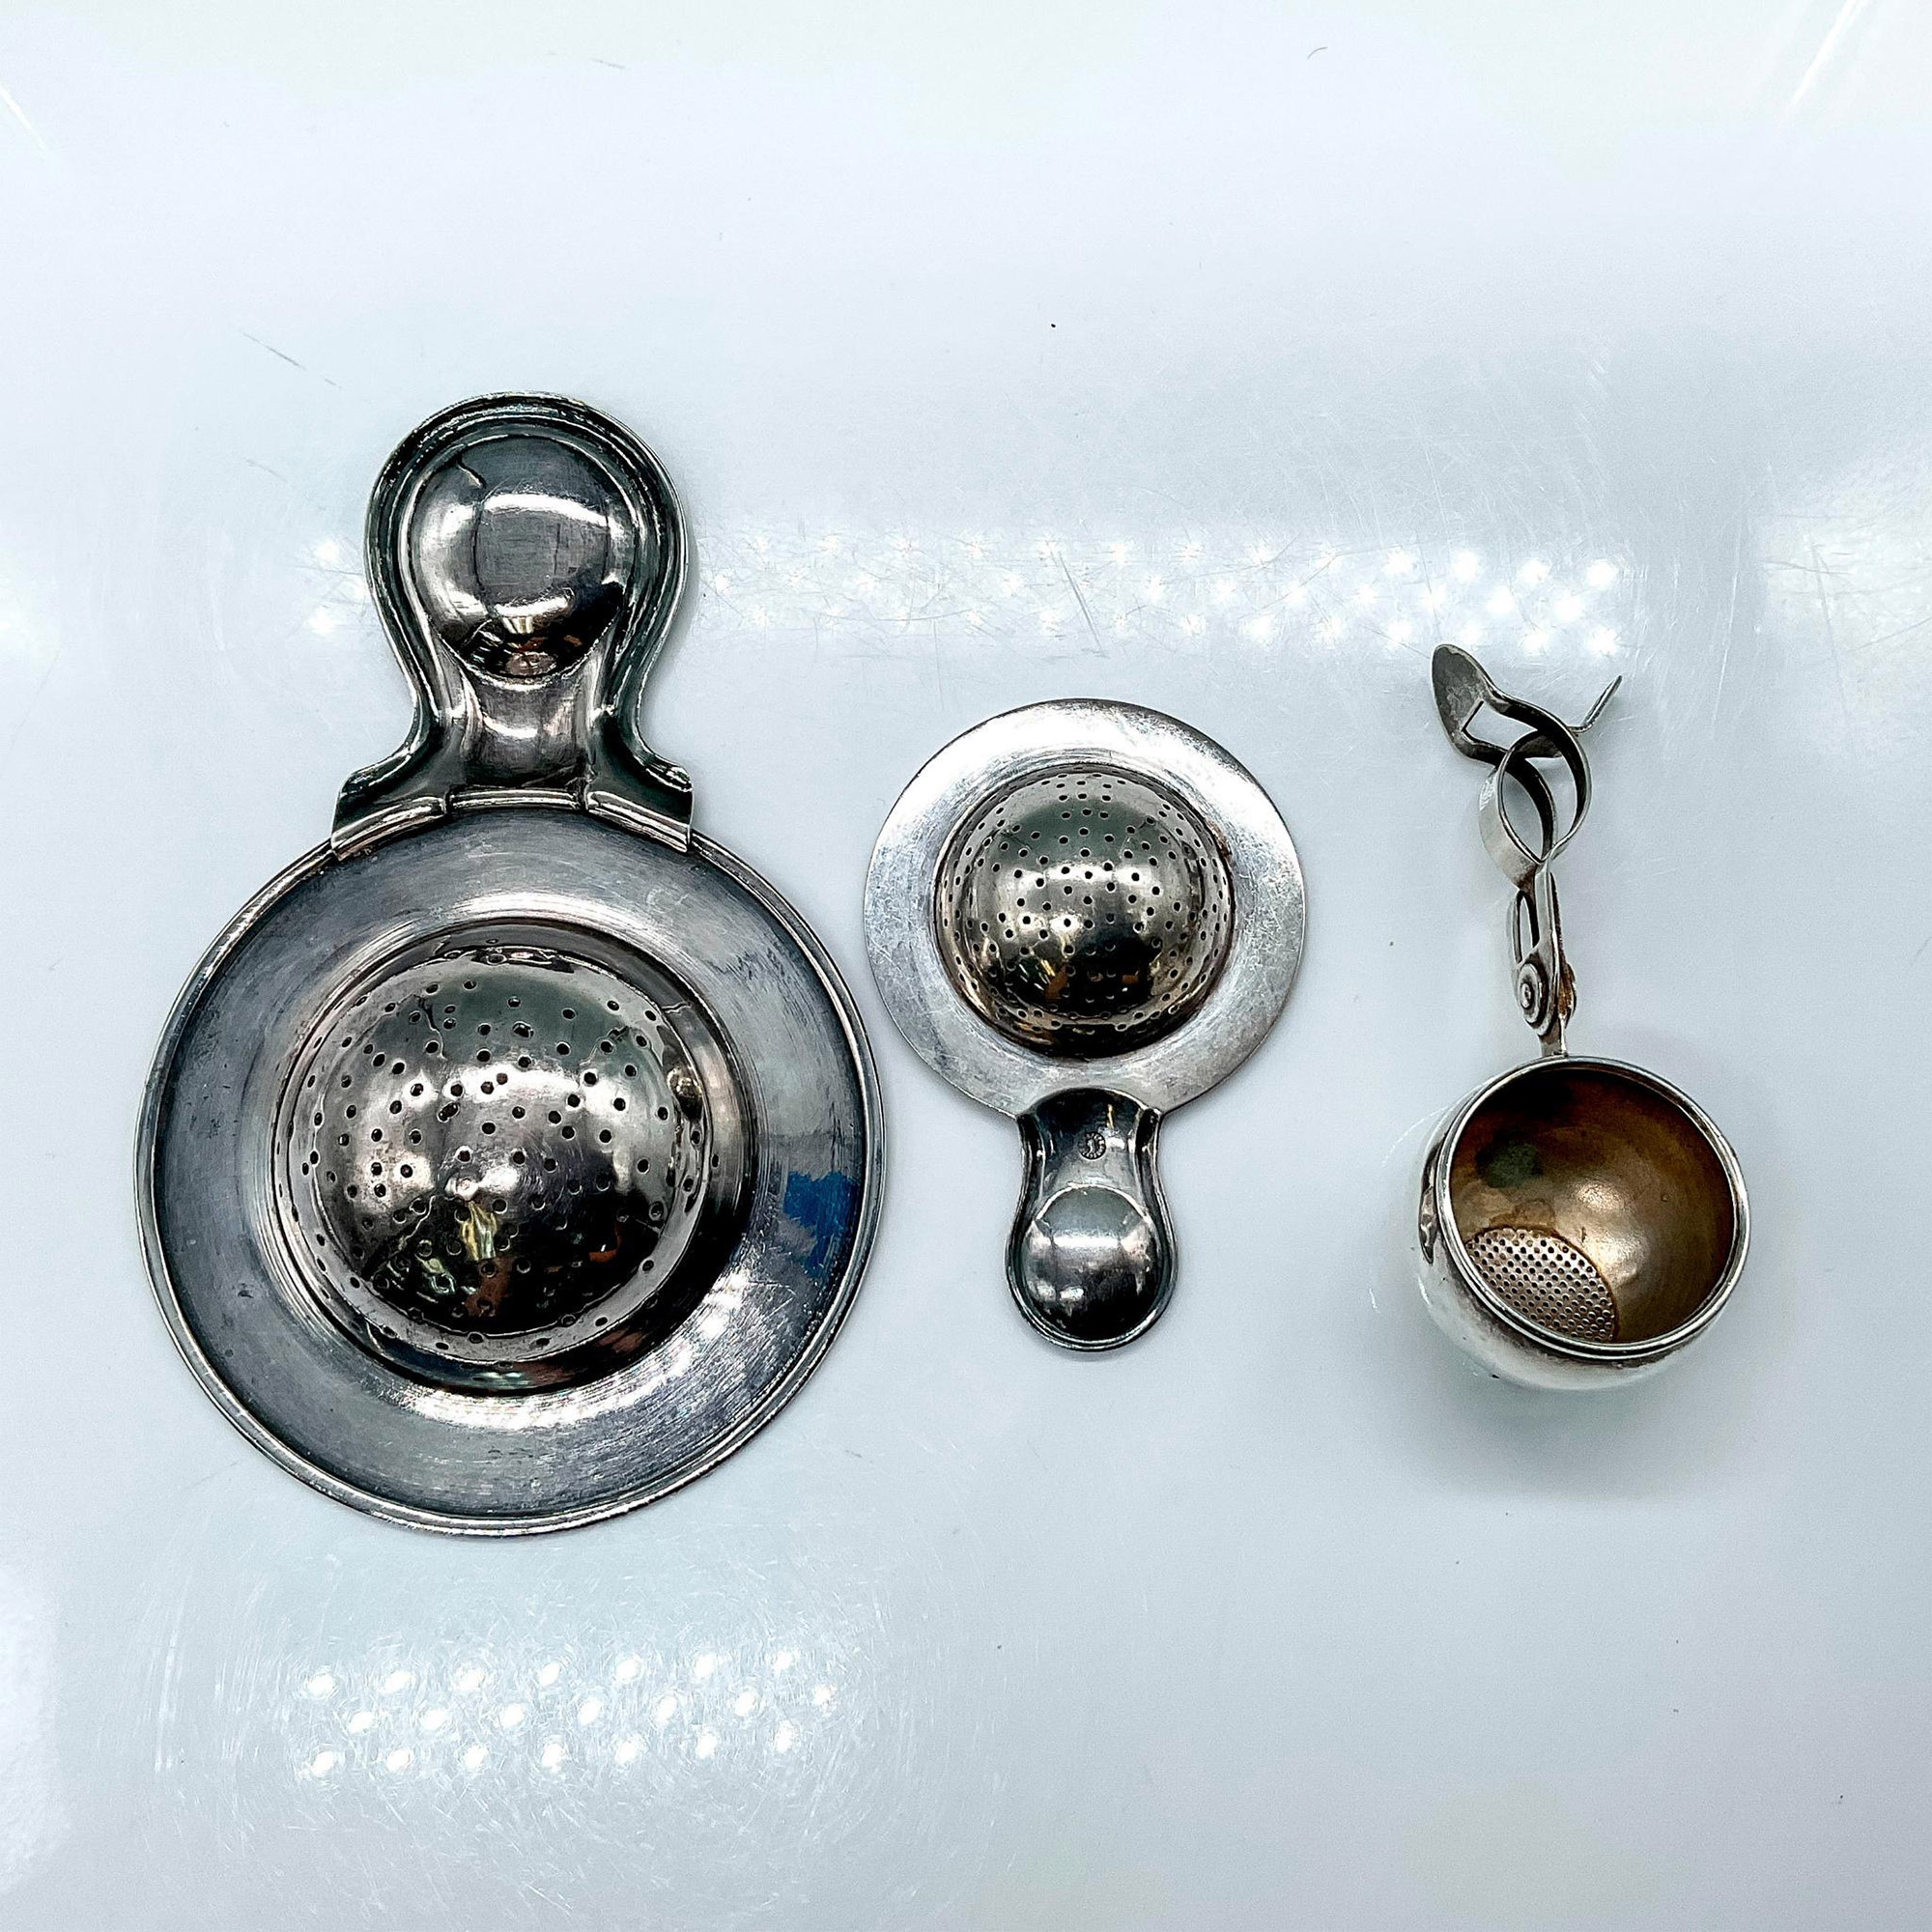 3pc Vintage Silver Plated Tea Strainer - Image 2 of 4